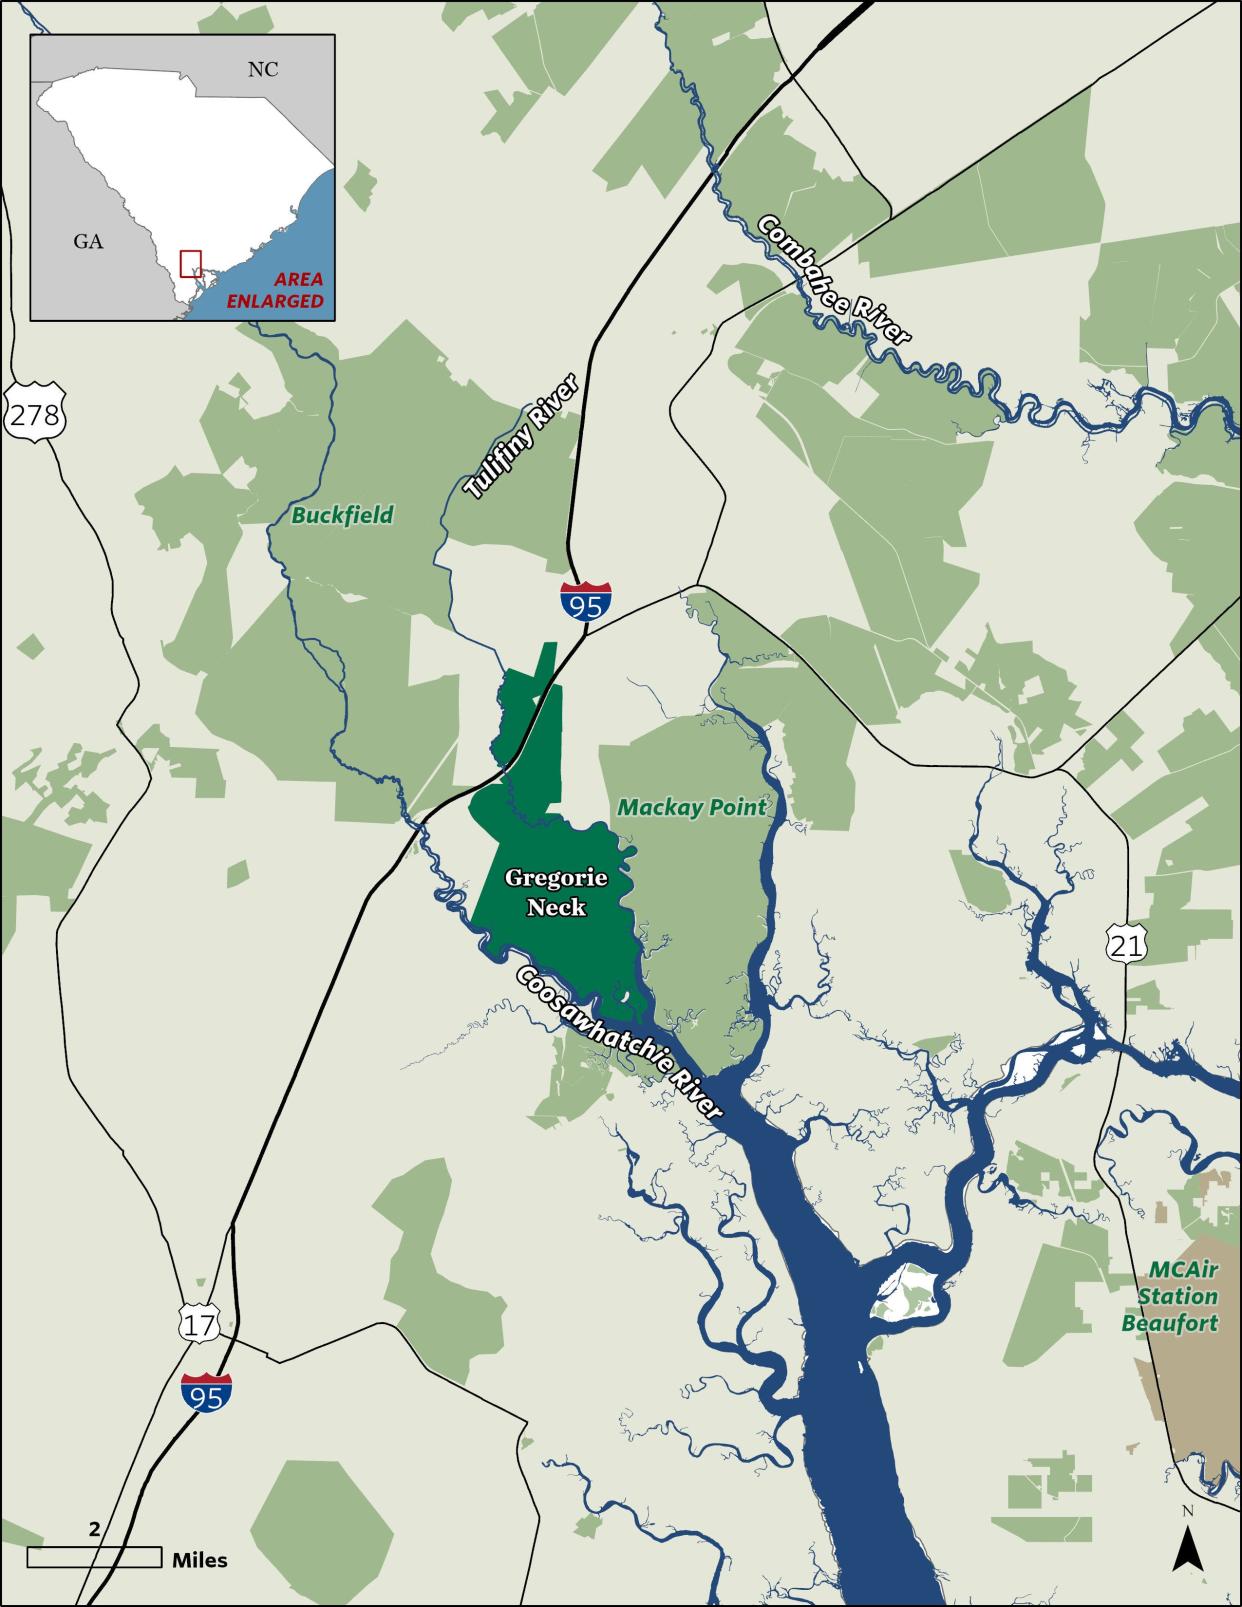 The 4,400-acre tract, about 40 miles northeast of Savannah, is flanked by deep water access on the Coosawhatchie and Tulifiny rivers, and bisected by Interstate 95.